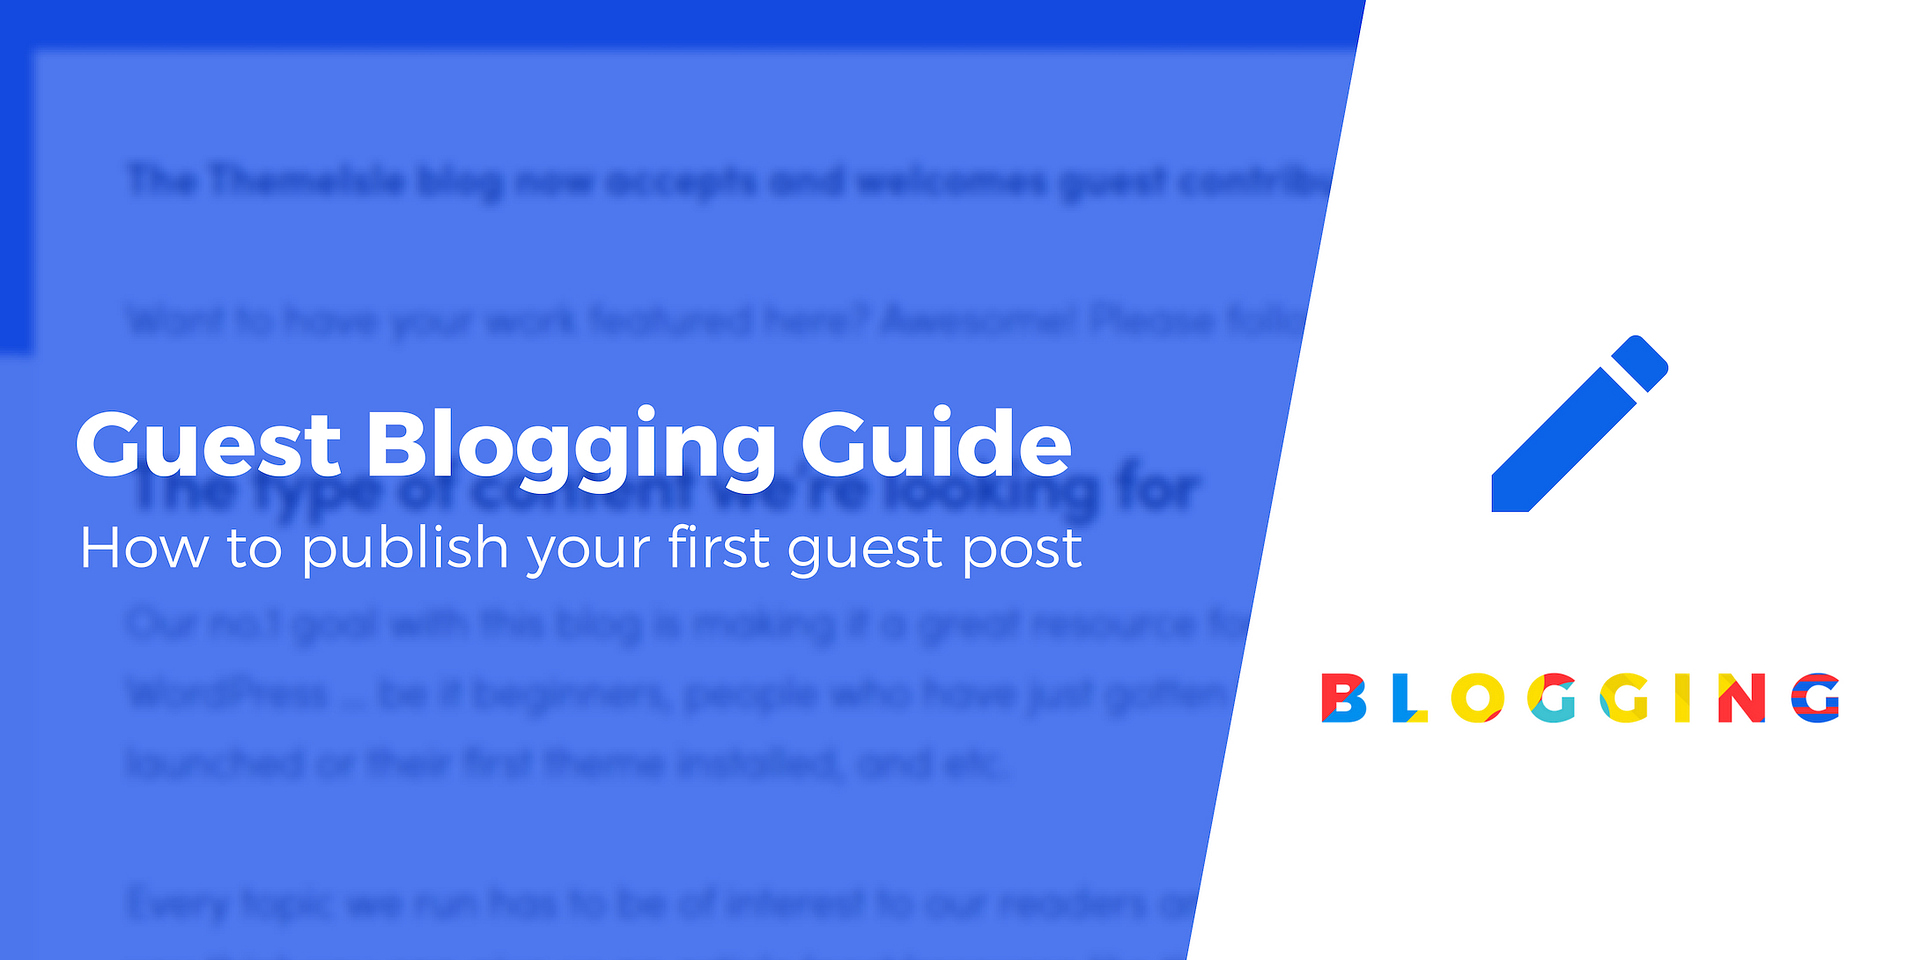 Guest Blogging Guide: 5 Steps to Get Your First Post Published